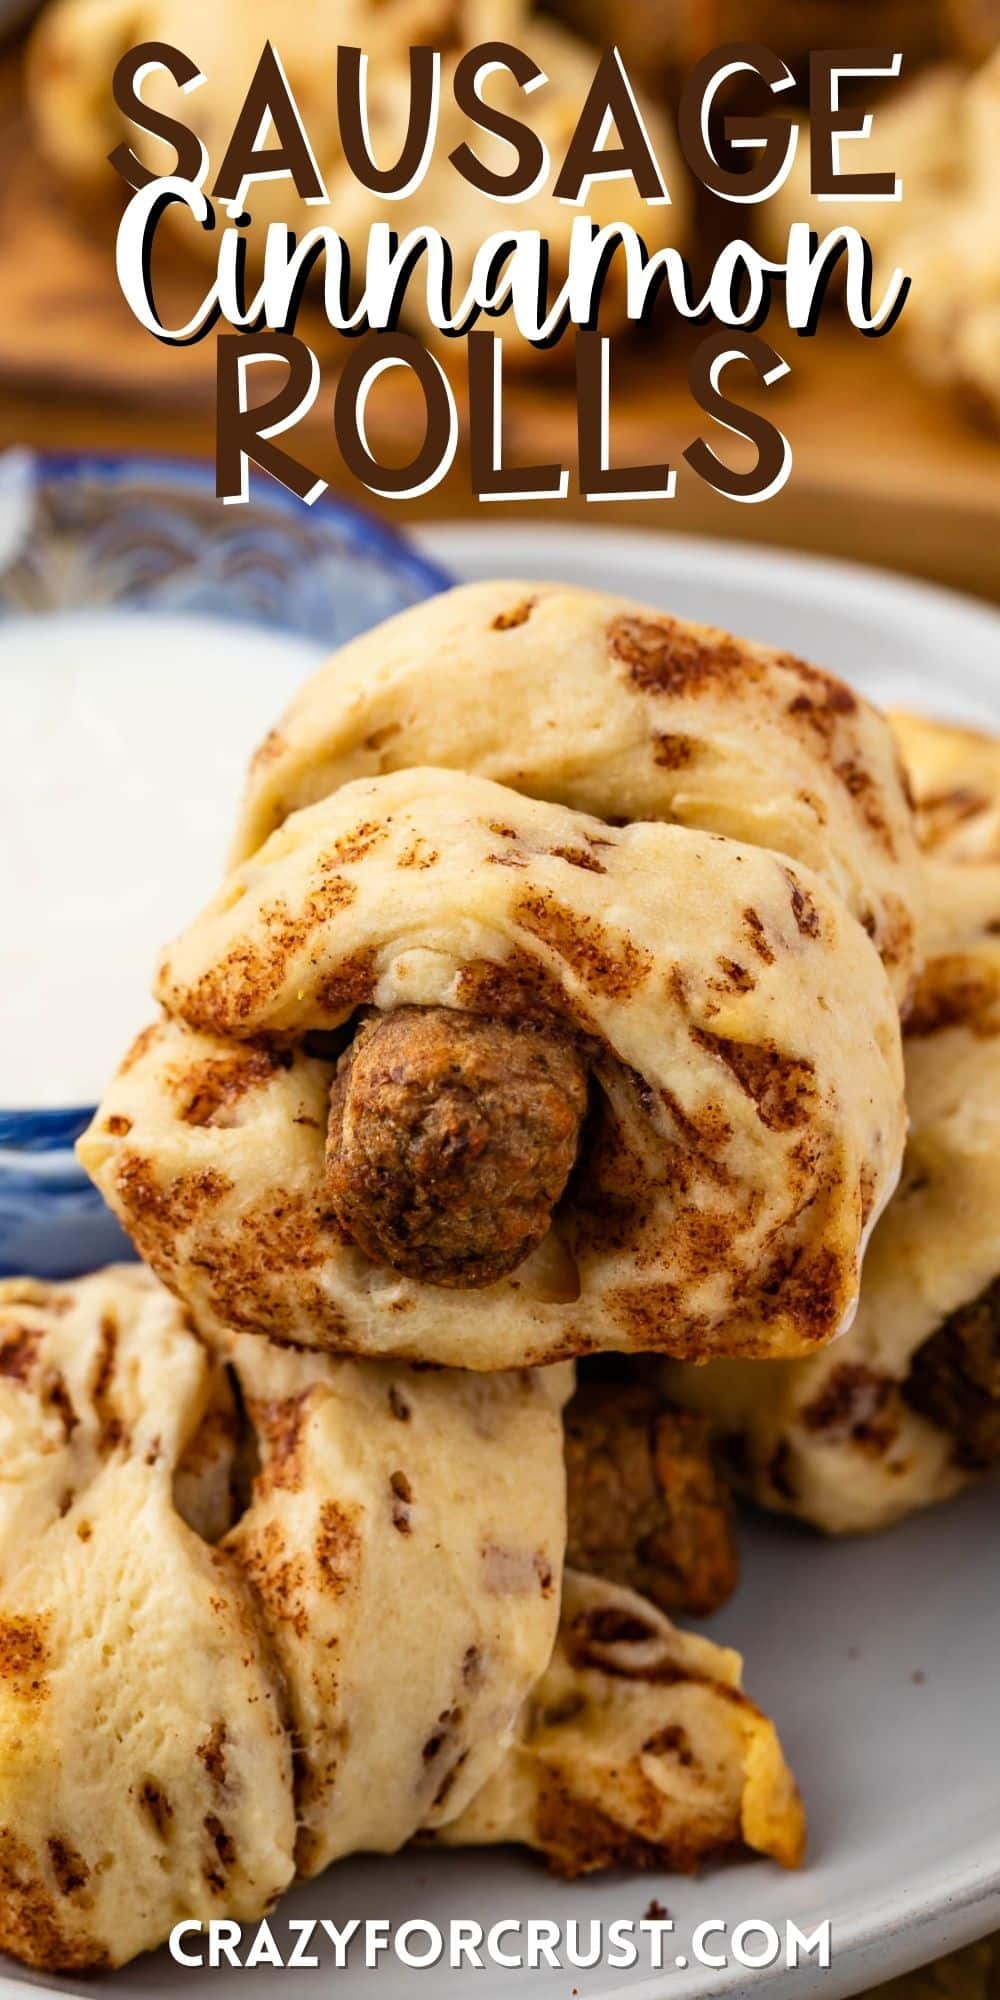 sausage wrapped in cinnamon rolls on a grey plate with words on the image.